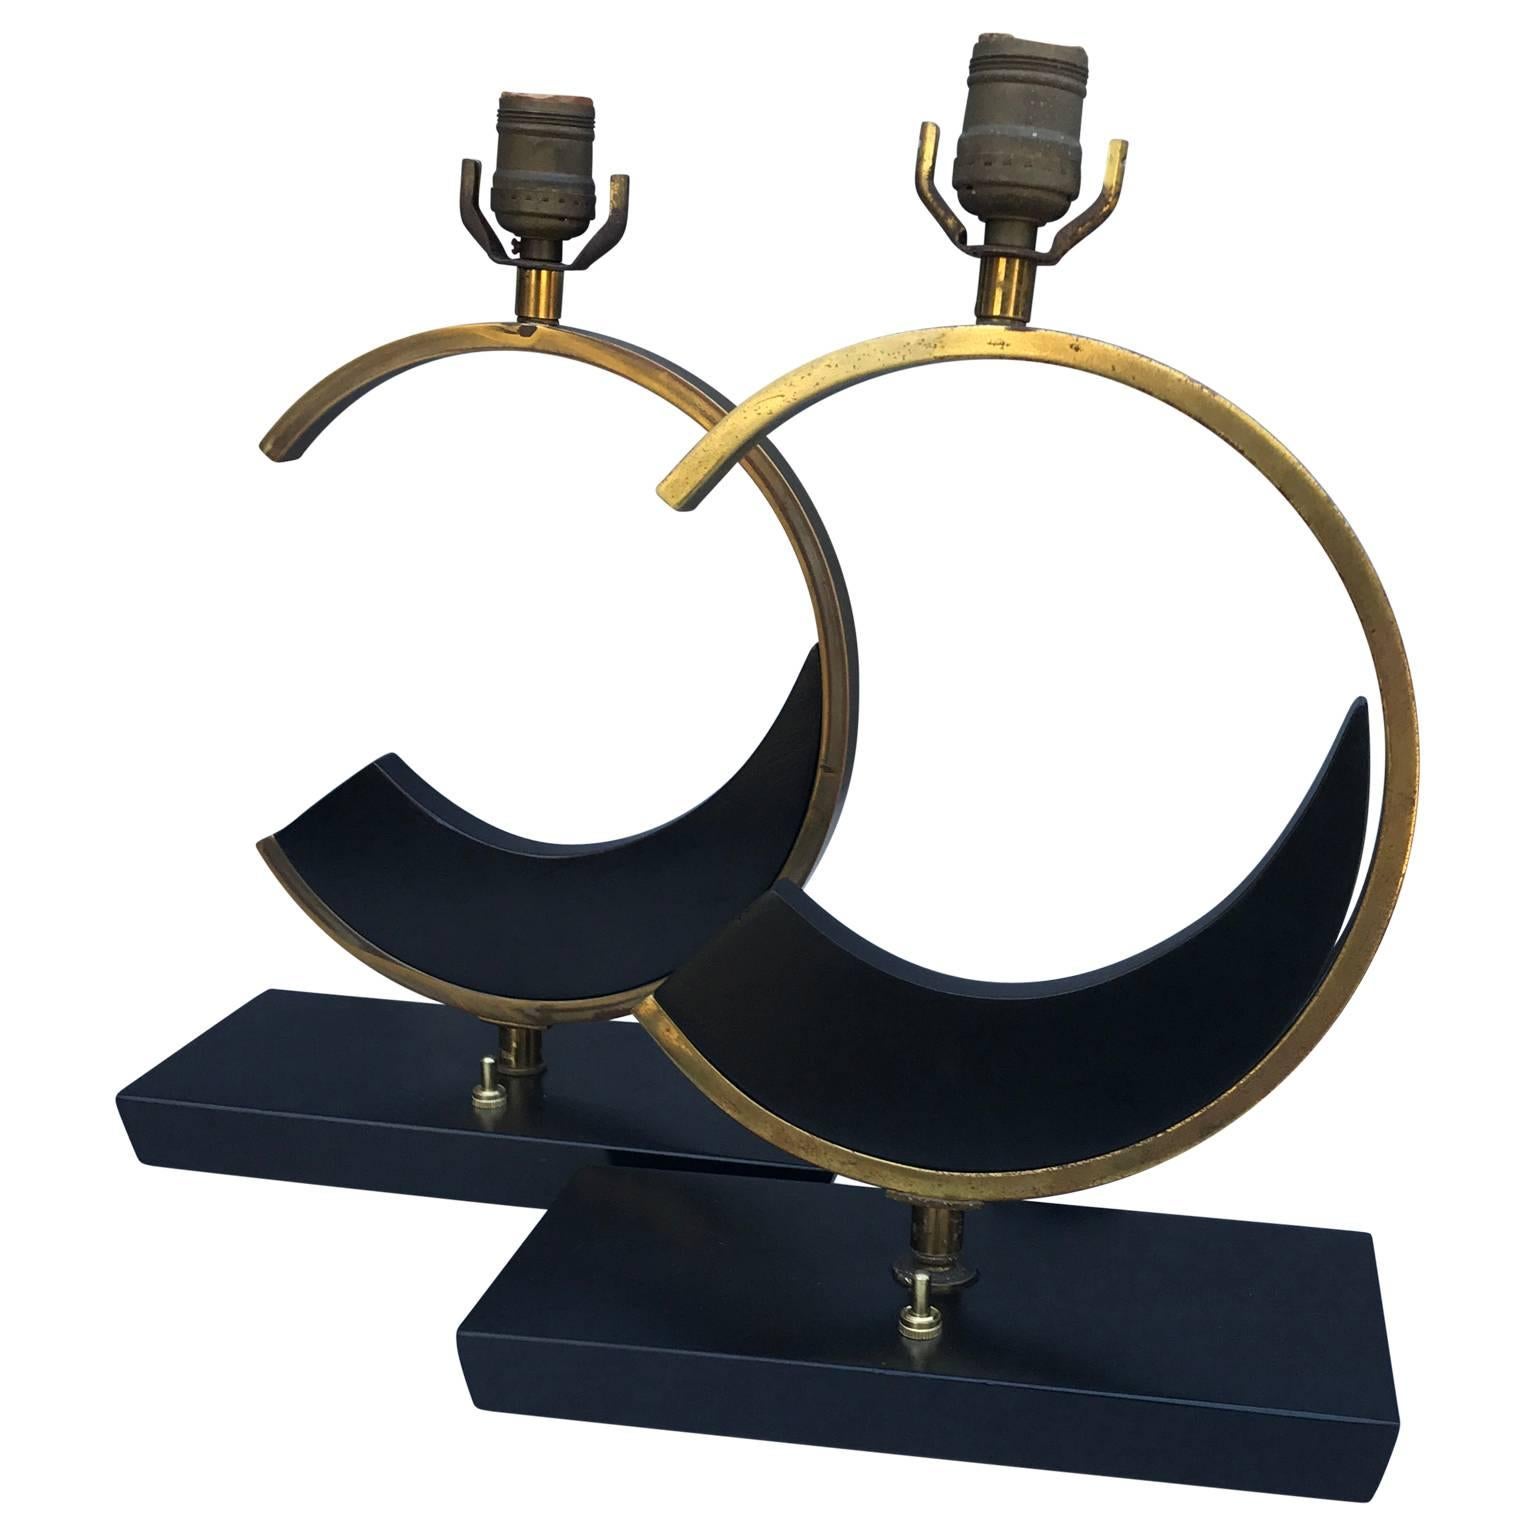 20th Century Pair of Mid-Century Modern C-Shaped Table Lamps